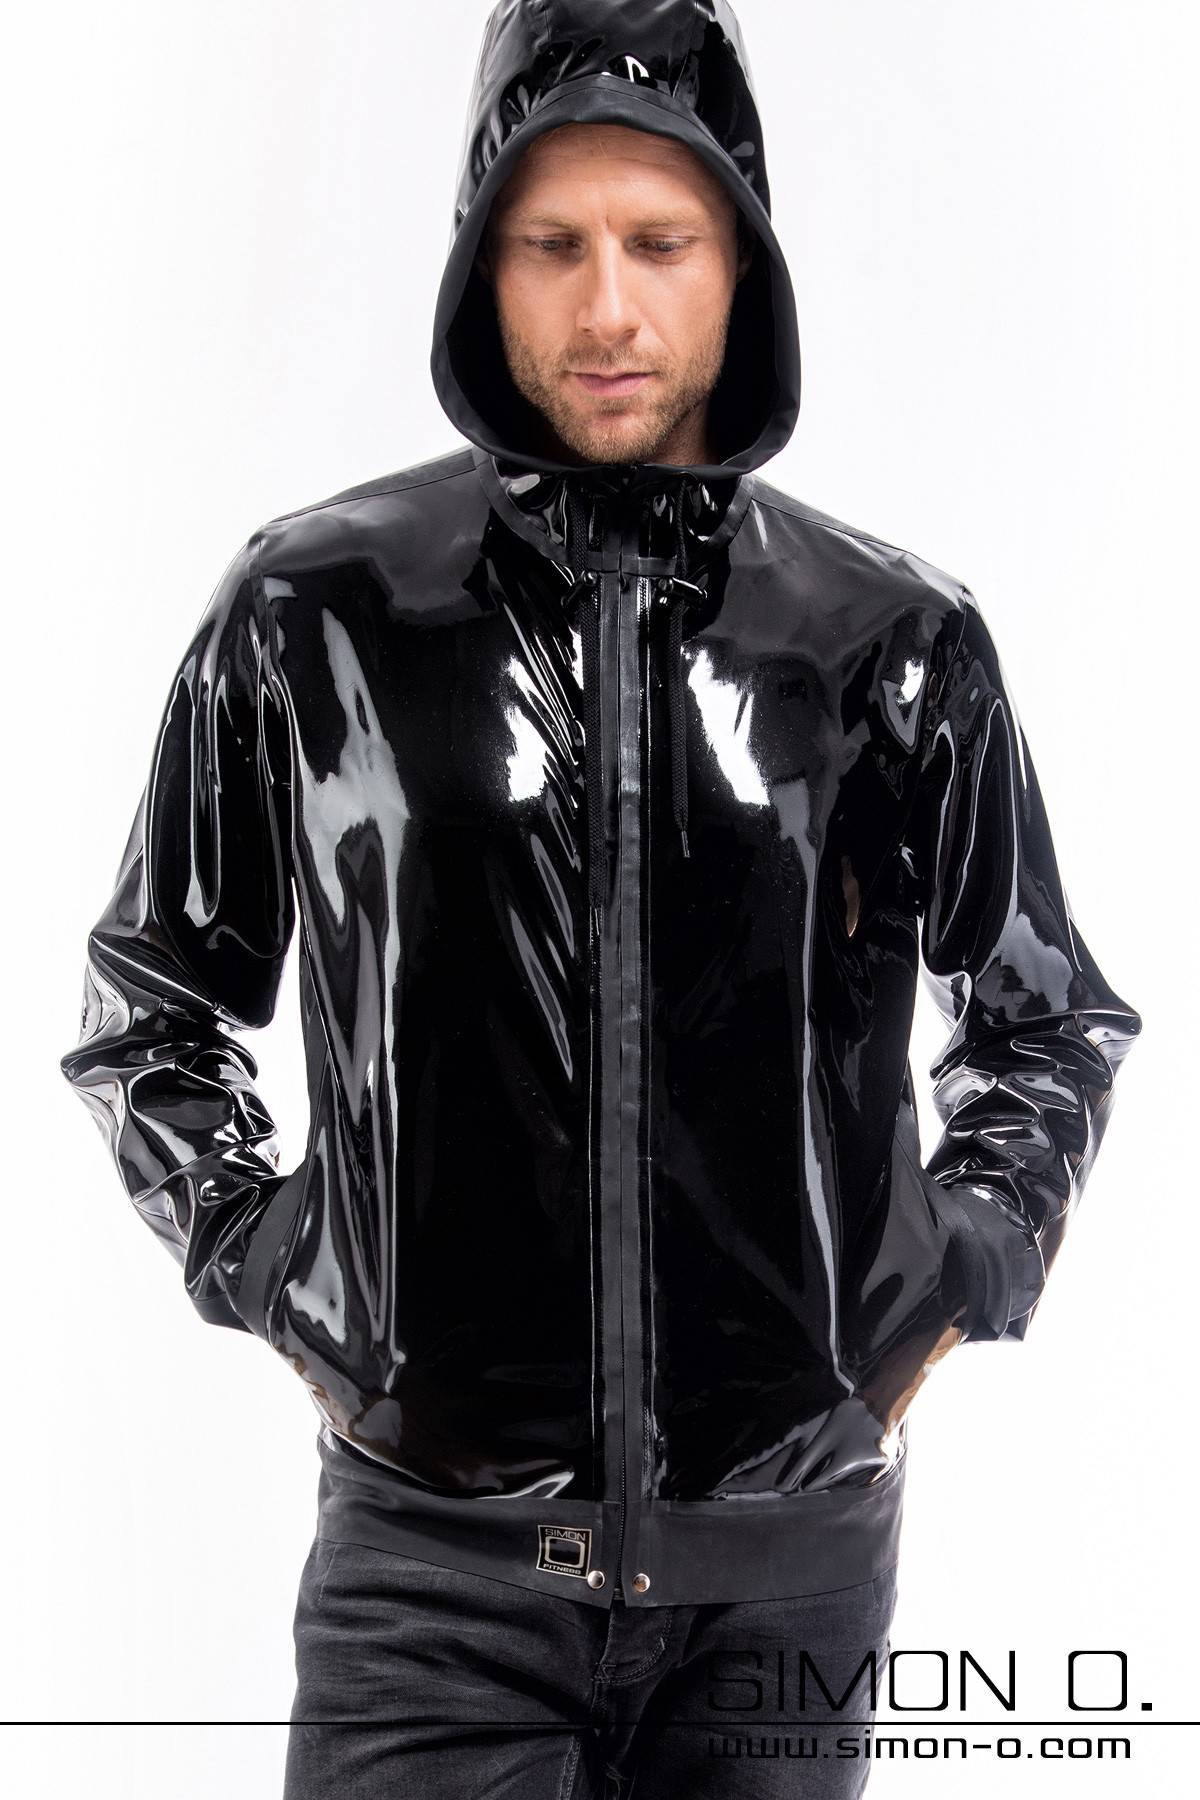 A man wears a shiny black latex jacket with hood and pockets in black